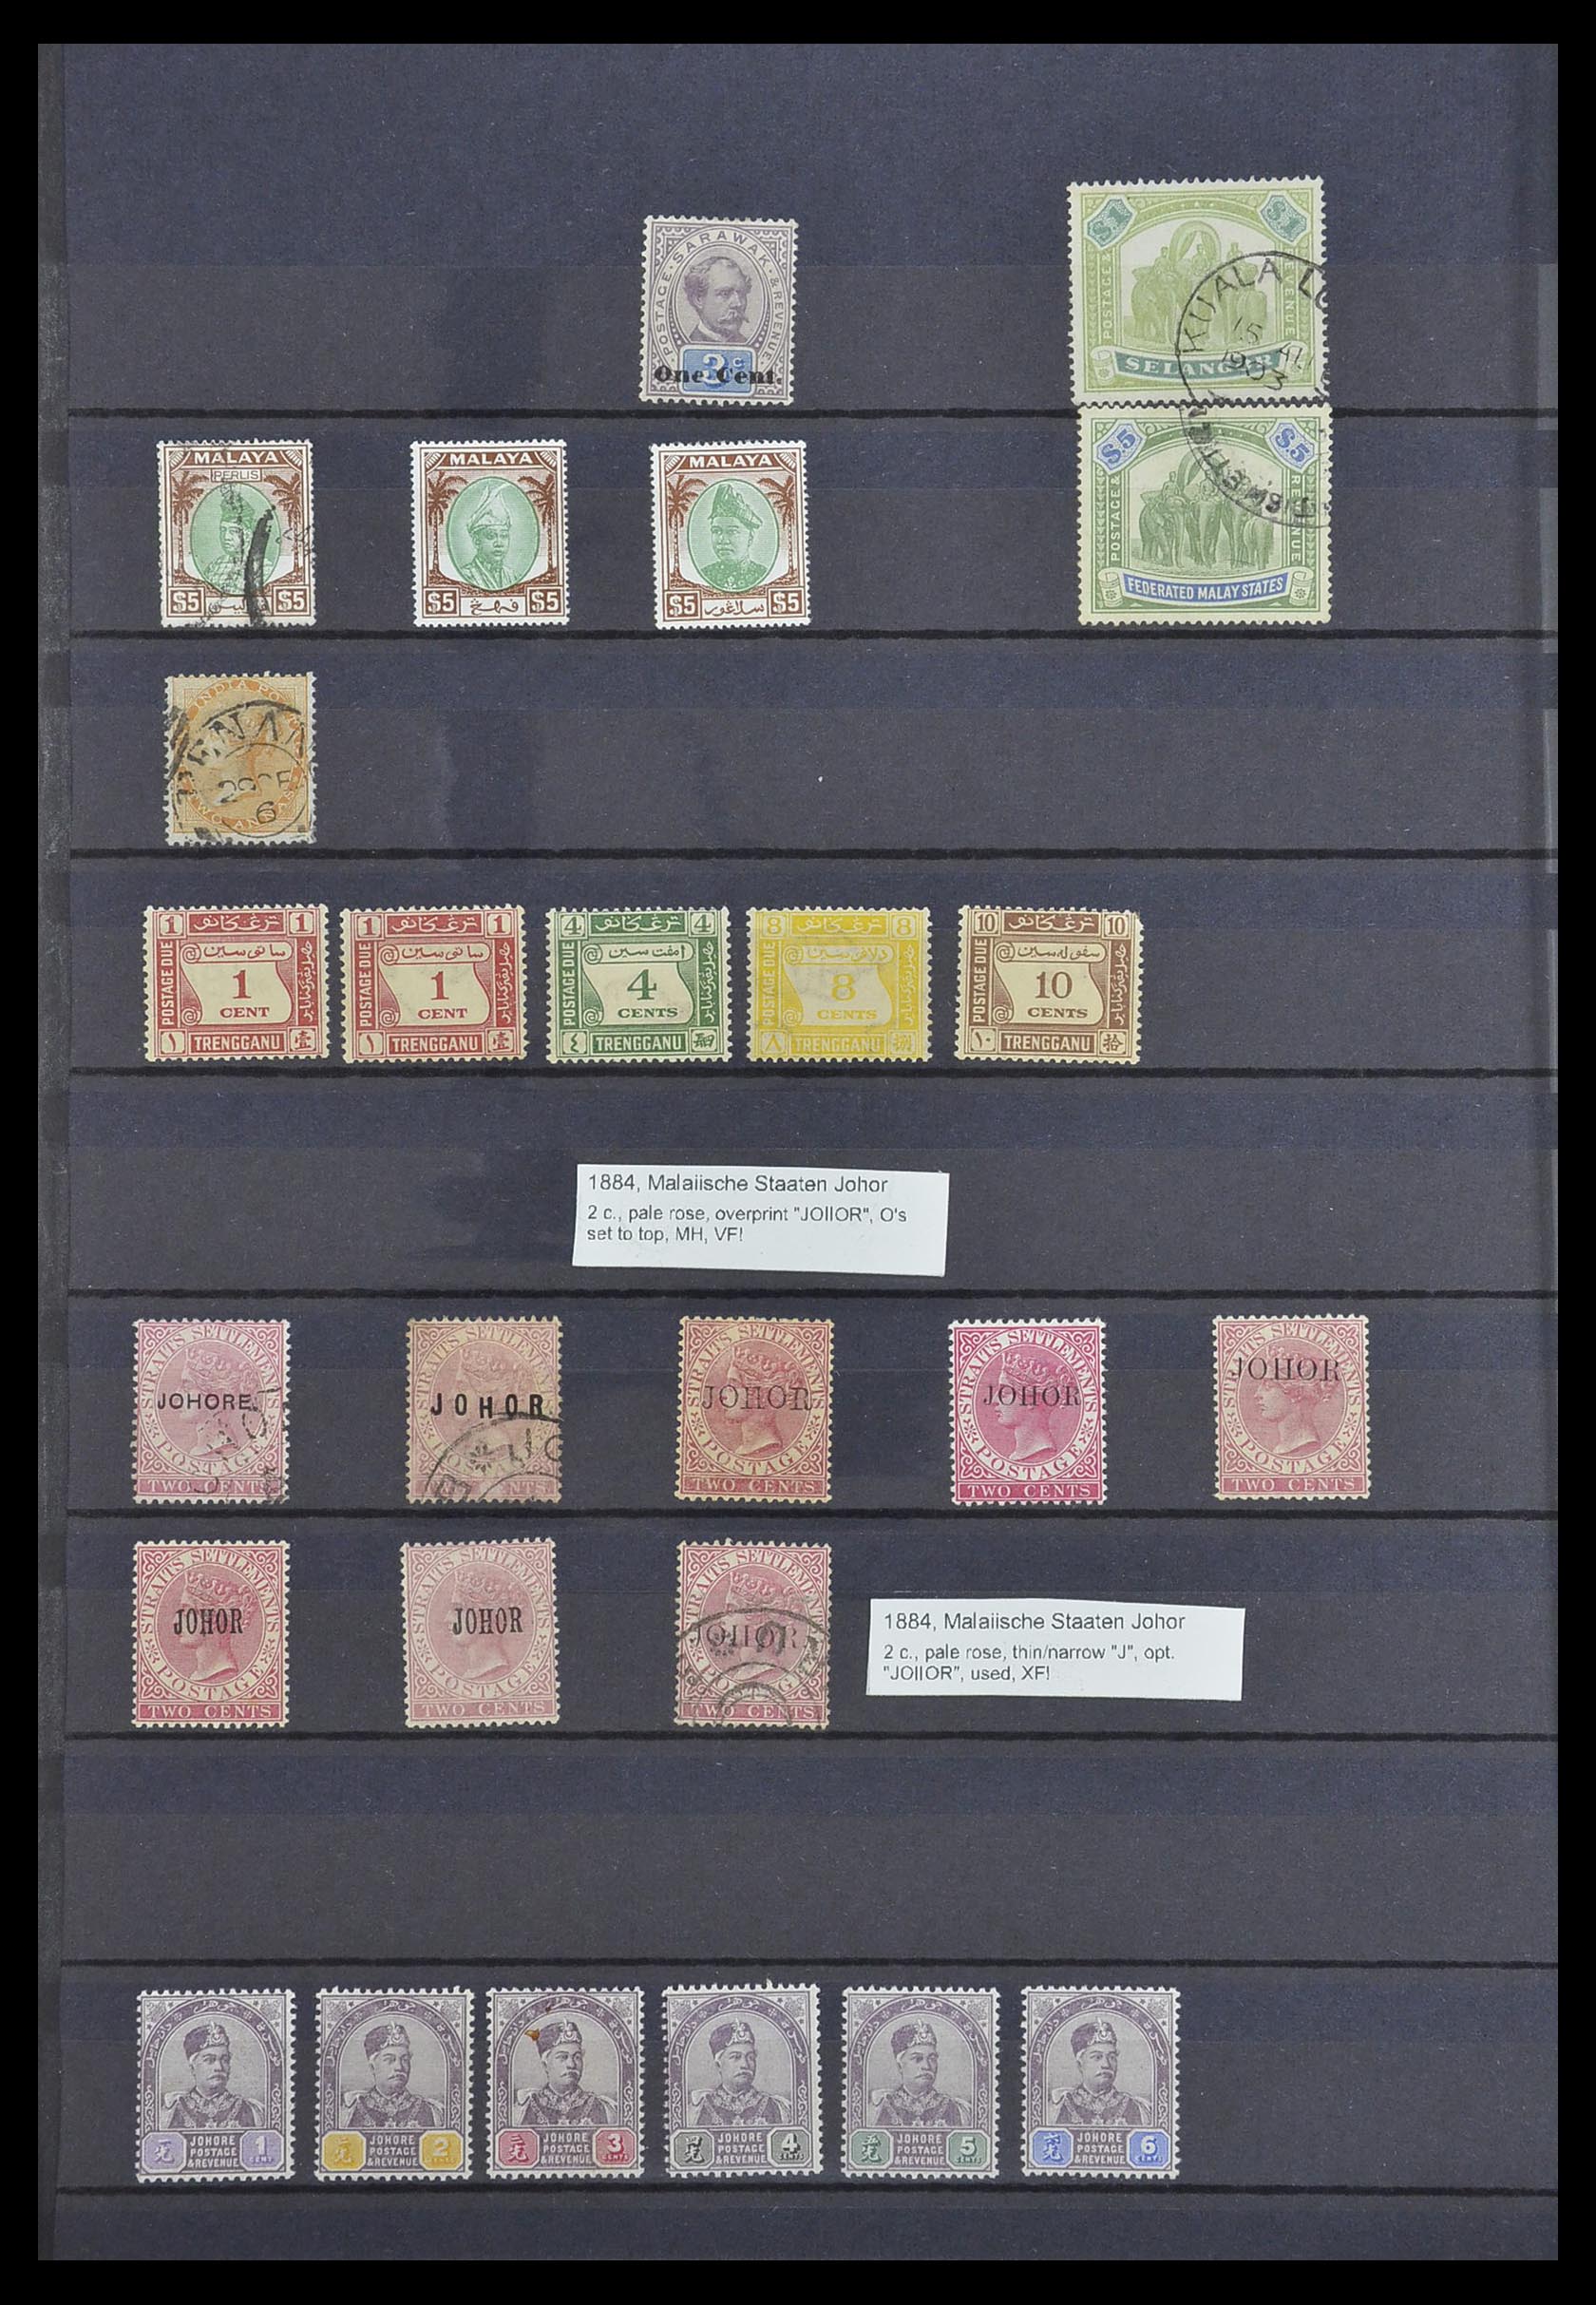 33640 020 - Stamp collection 33640 British Commonwealth key items 1853-1953.